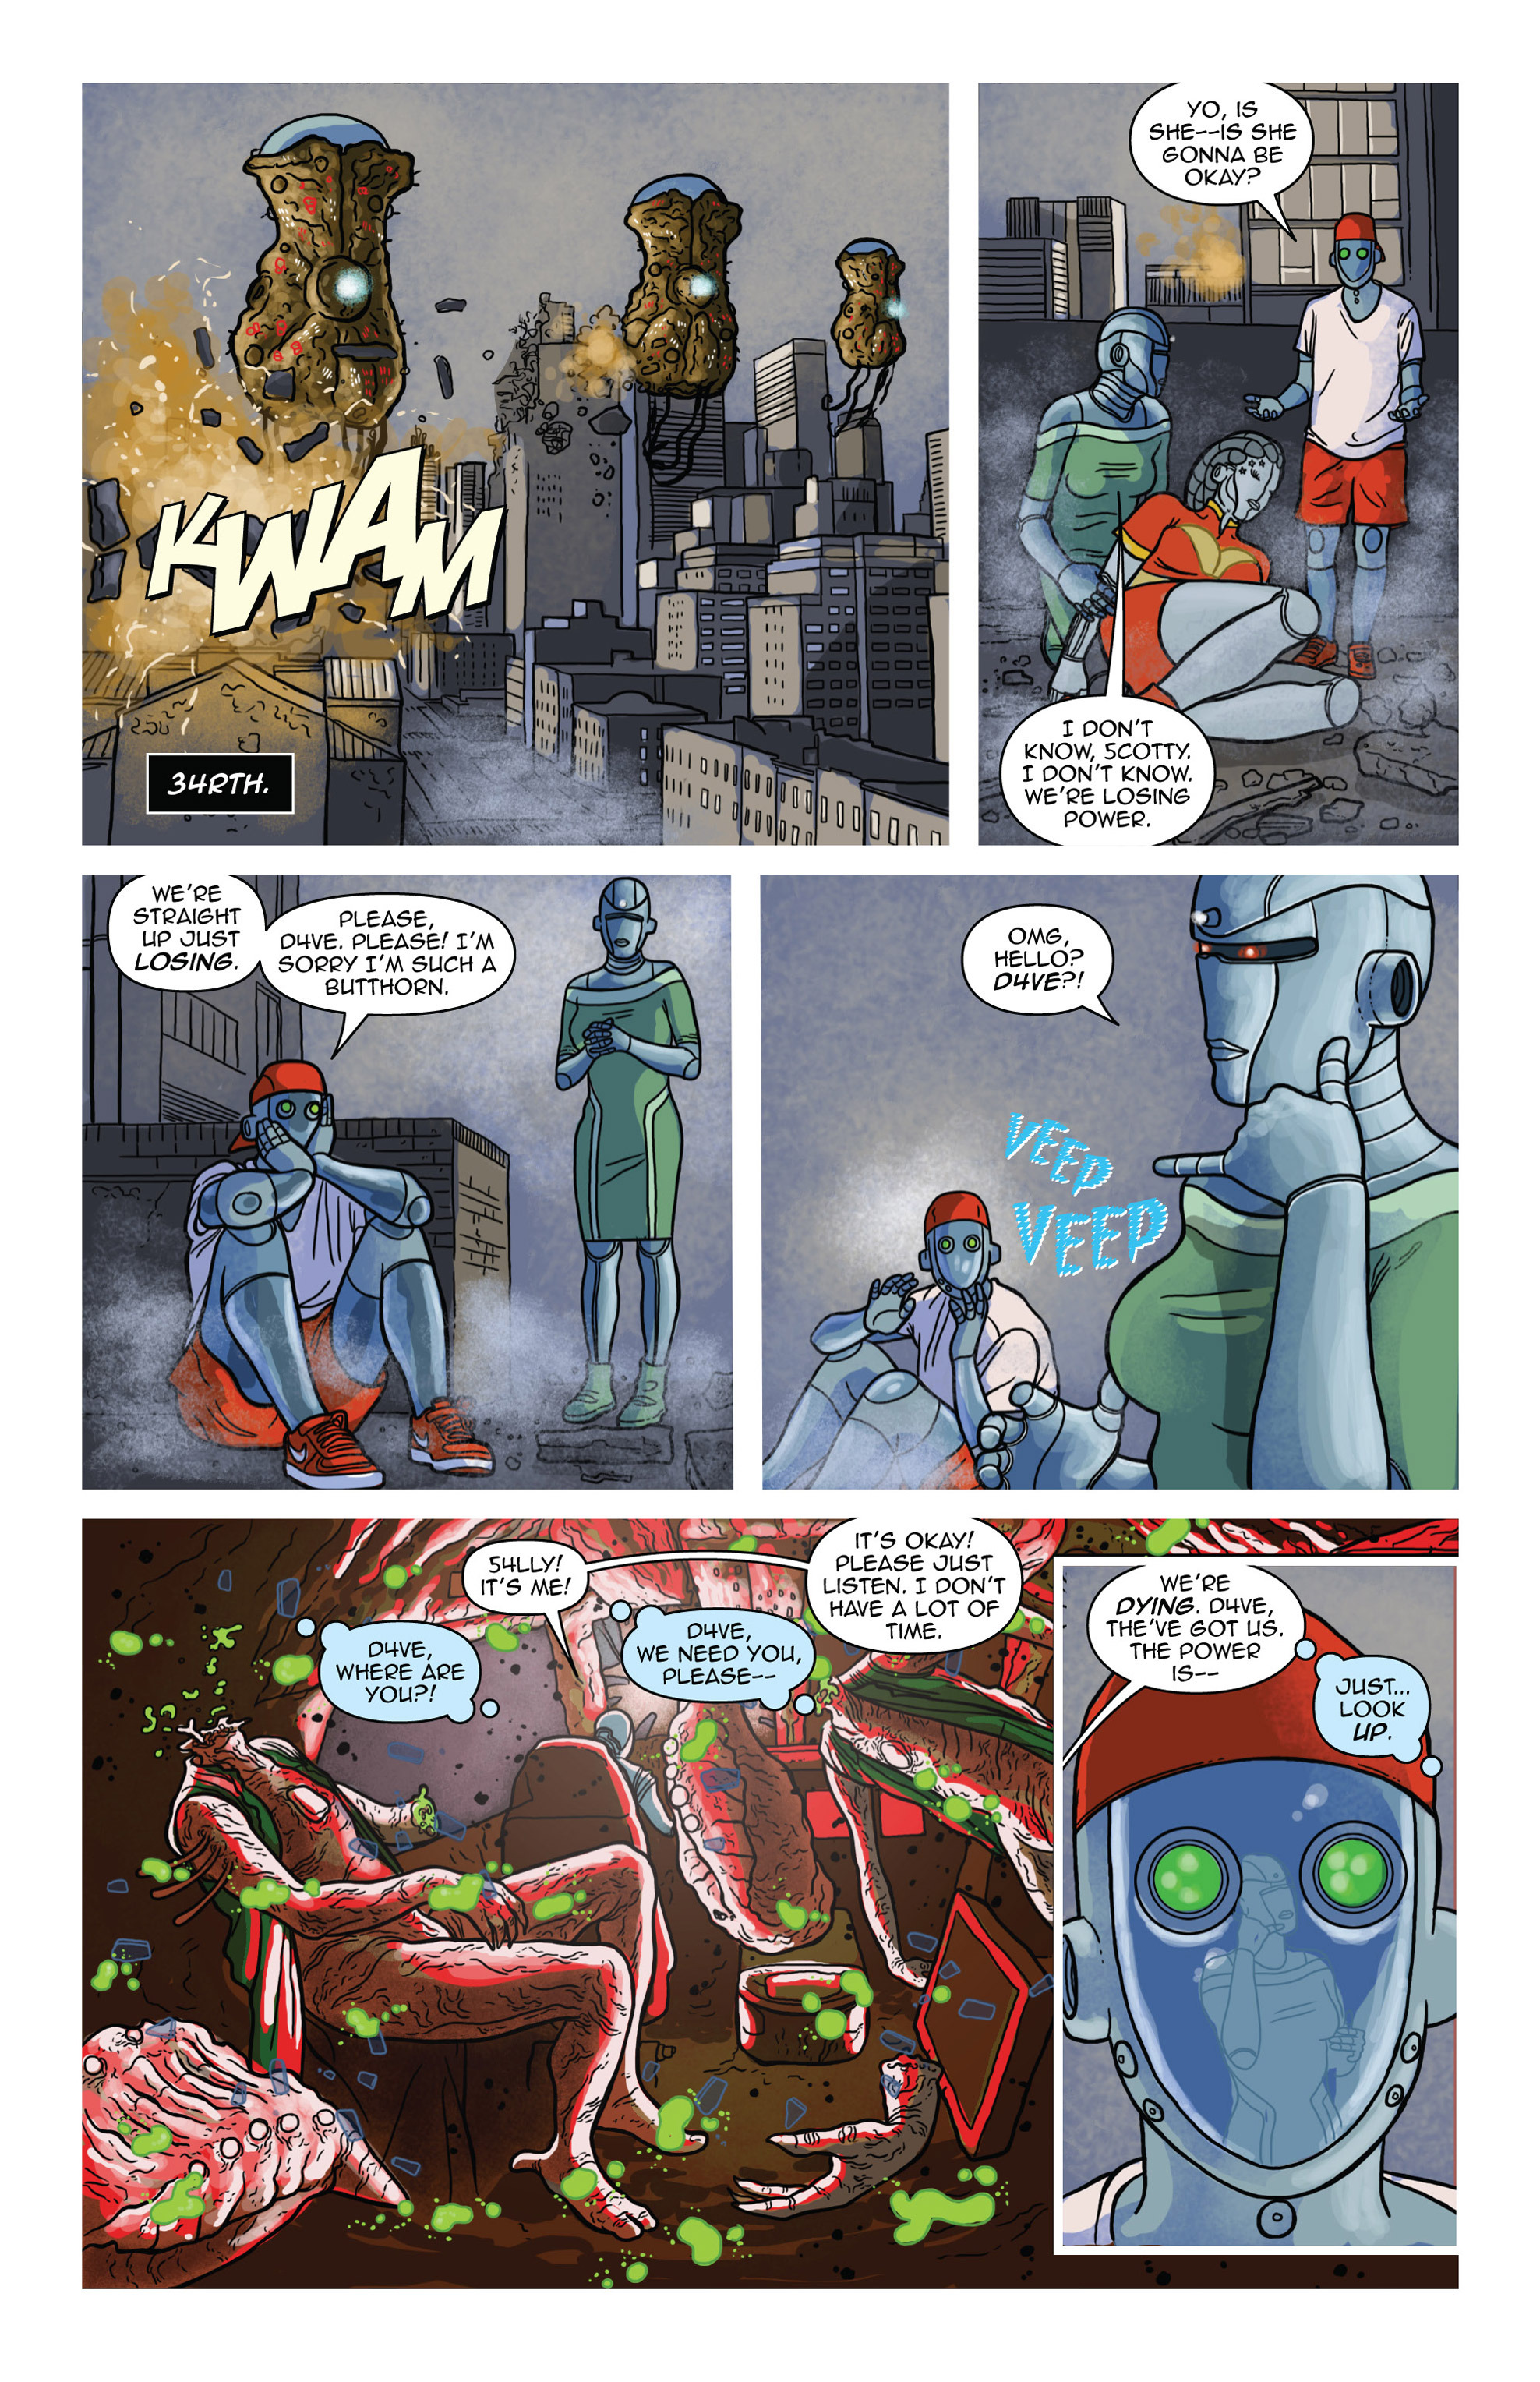 Read online D4VE comic -  Issue #5 - 15